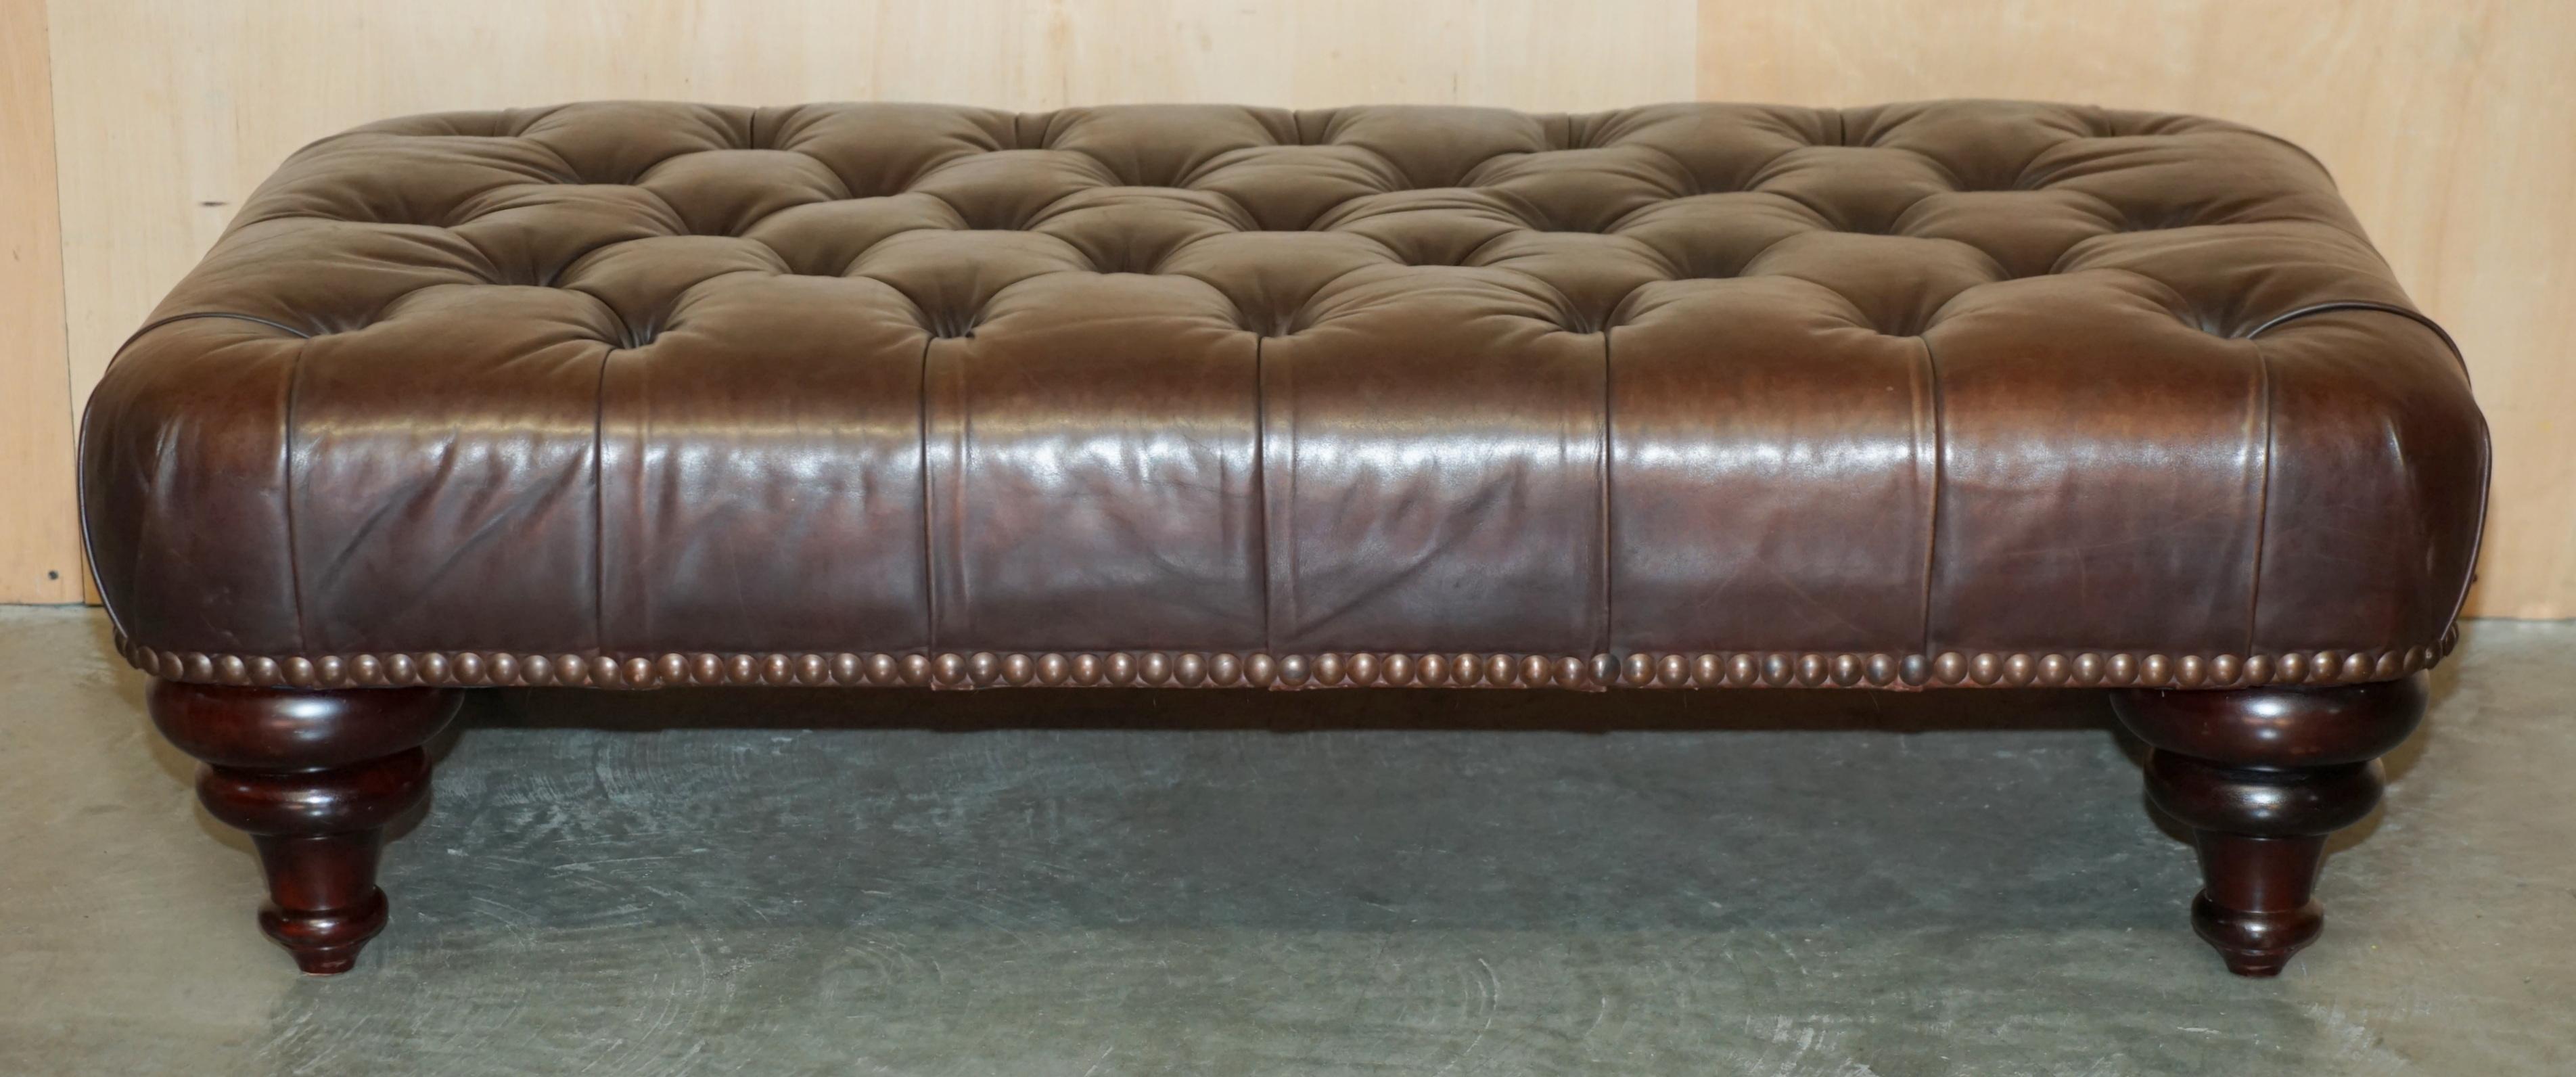 Royal House Antiques

Royal House Antiques is delighted to offer for sale this stunning George Smith Hand Dyed brown leather Chesterfield tufted footstool 

Please note the delivery fee listed is just a guide, it covers within the M25 only for the